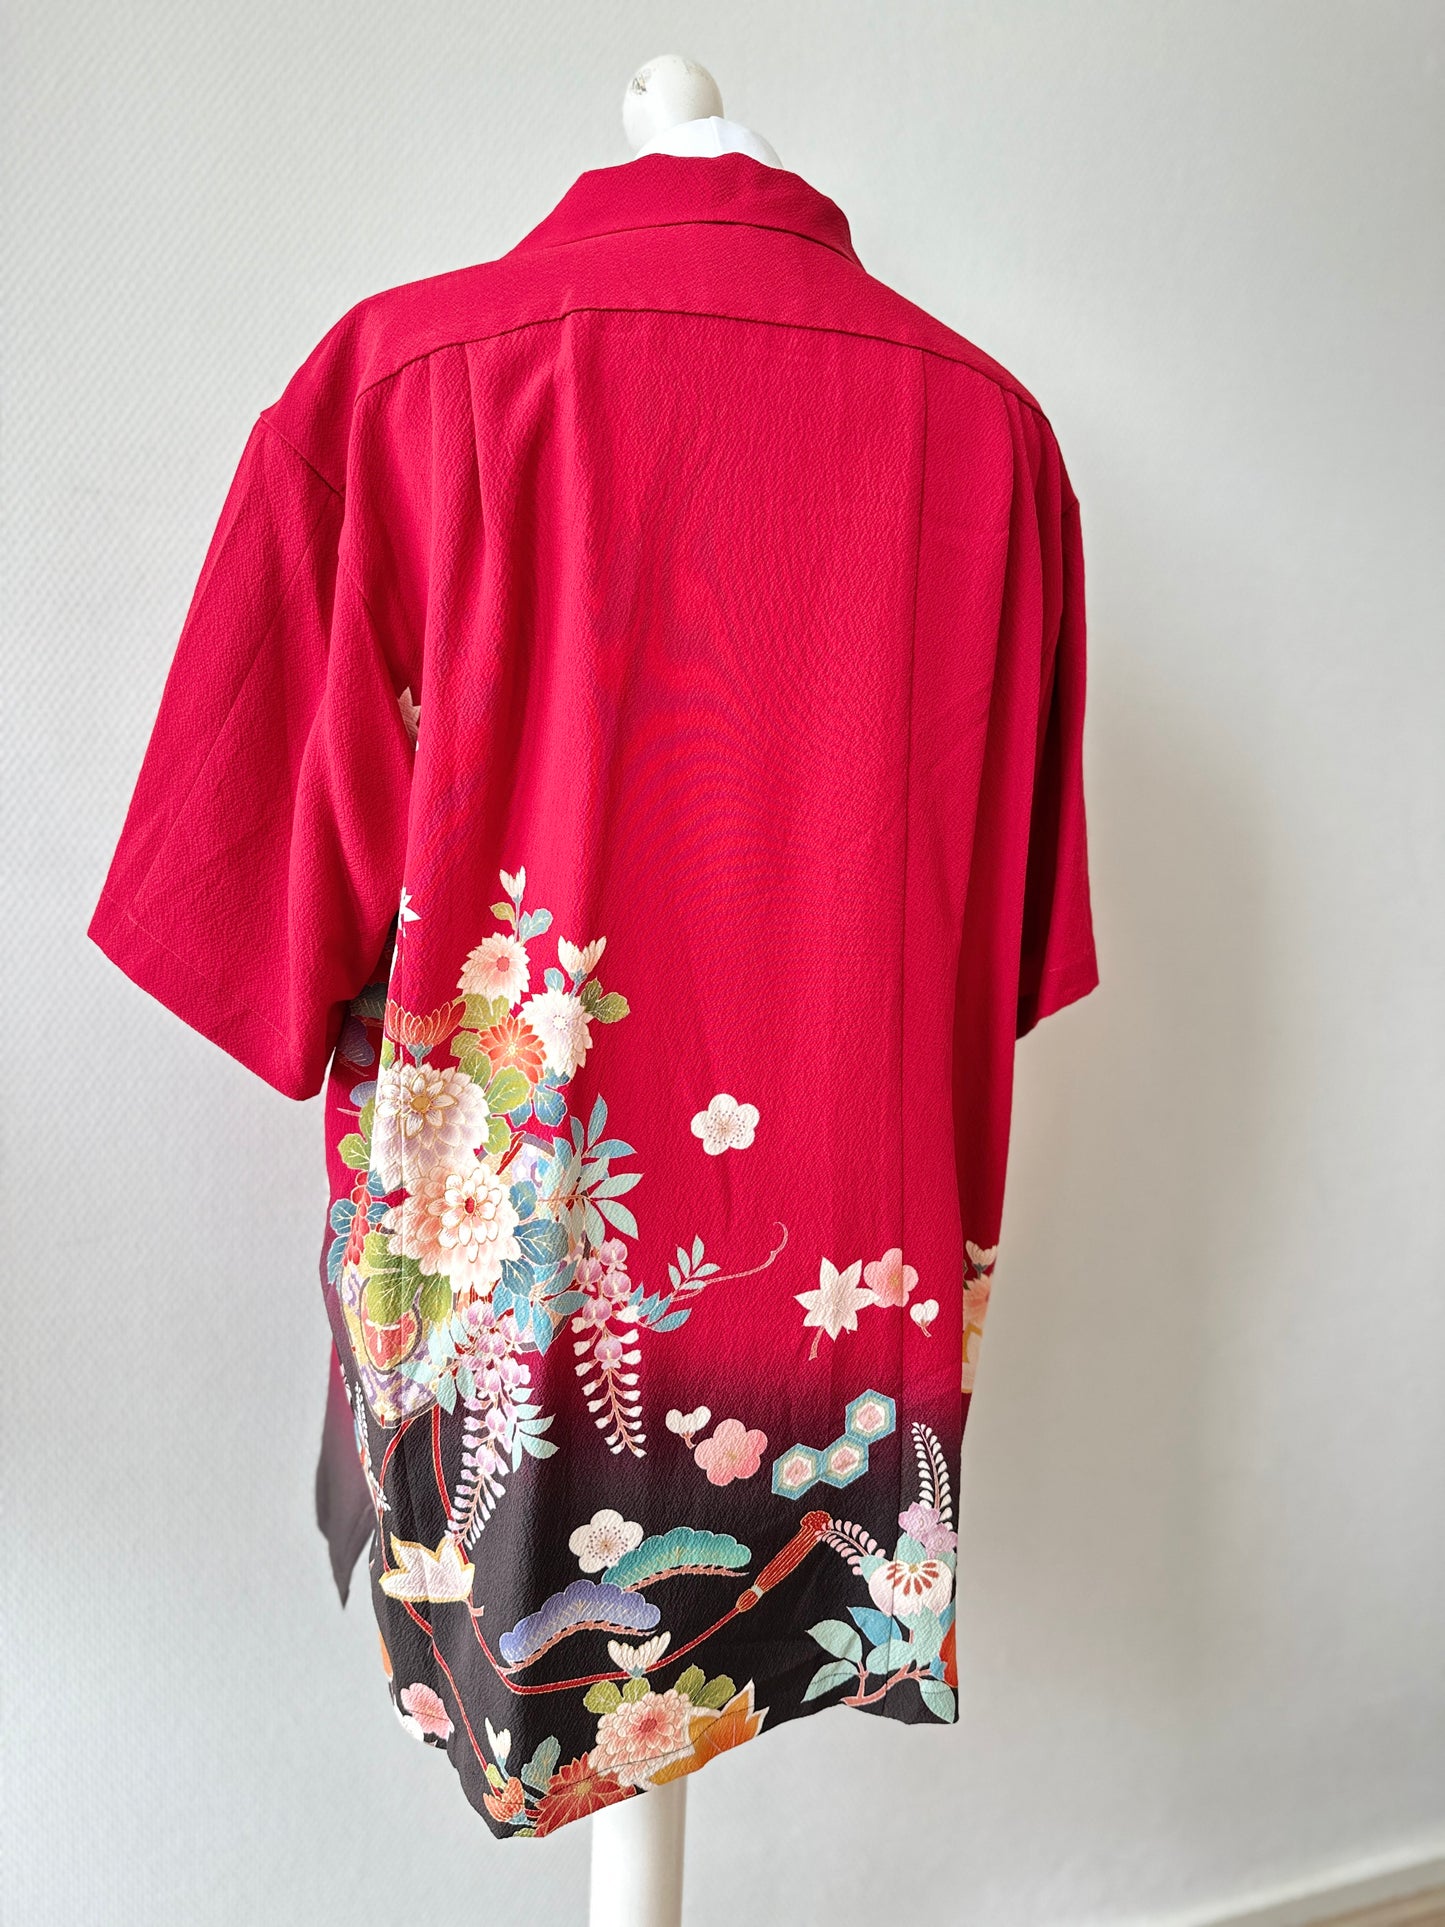 【Red,pine tree and wisteria】Hawaiian shirt/Size:2L＜New・Silk＞For Men,For Women,Japanese kimono,Japan unisexese Clothing,unisex,Japanese Gifts,Original Item